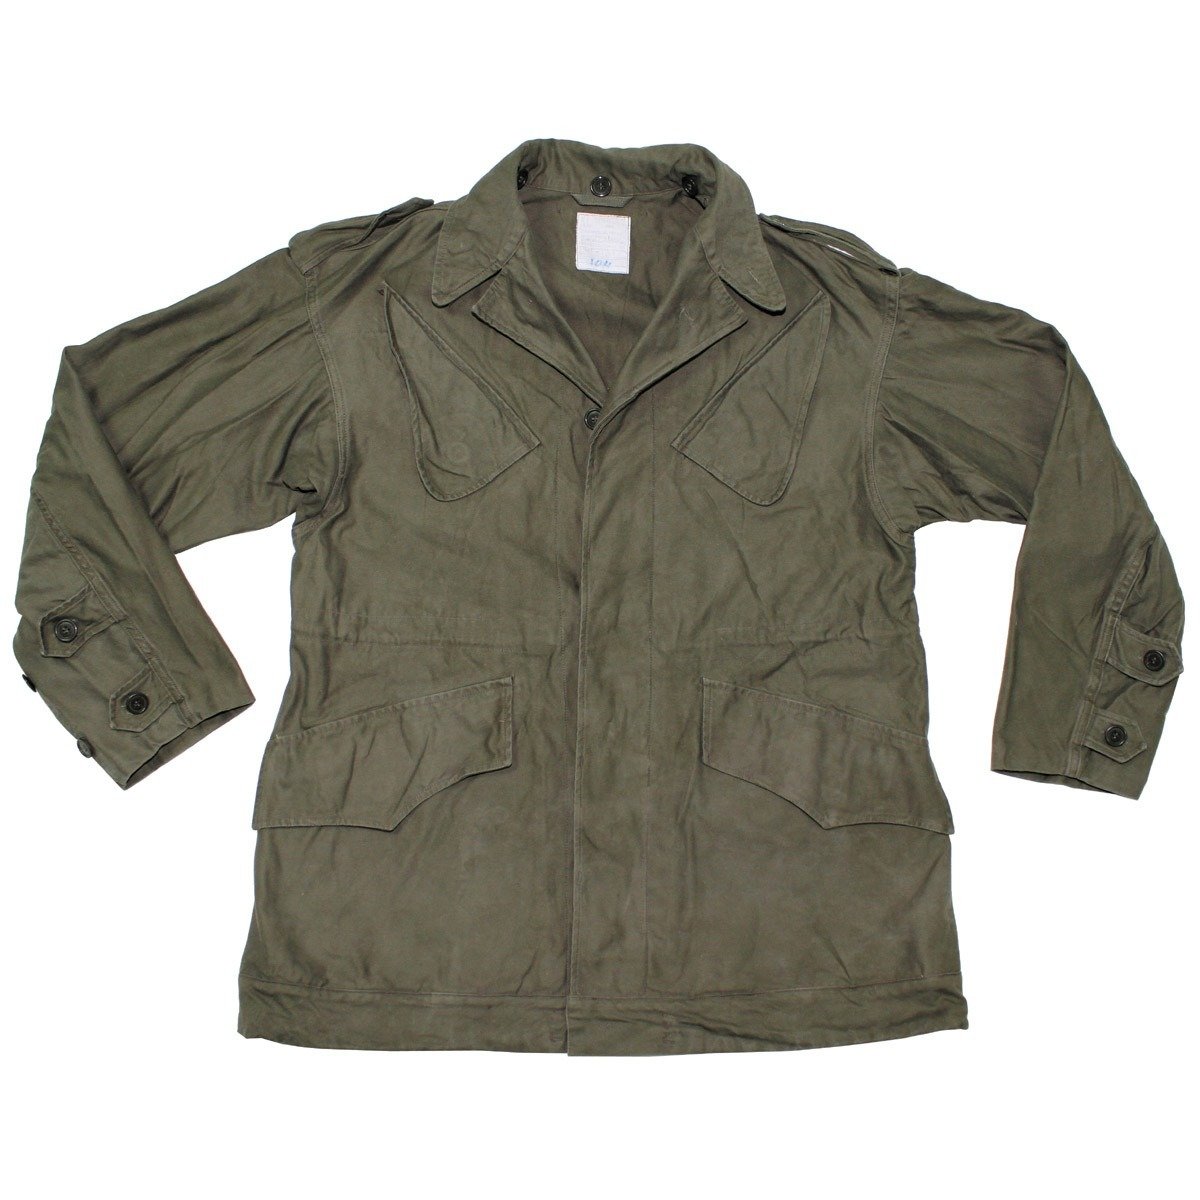 Dutch Field Jacket, od green, used | Military Surplus \ Used Clothing ...